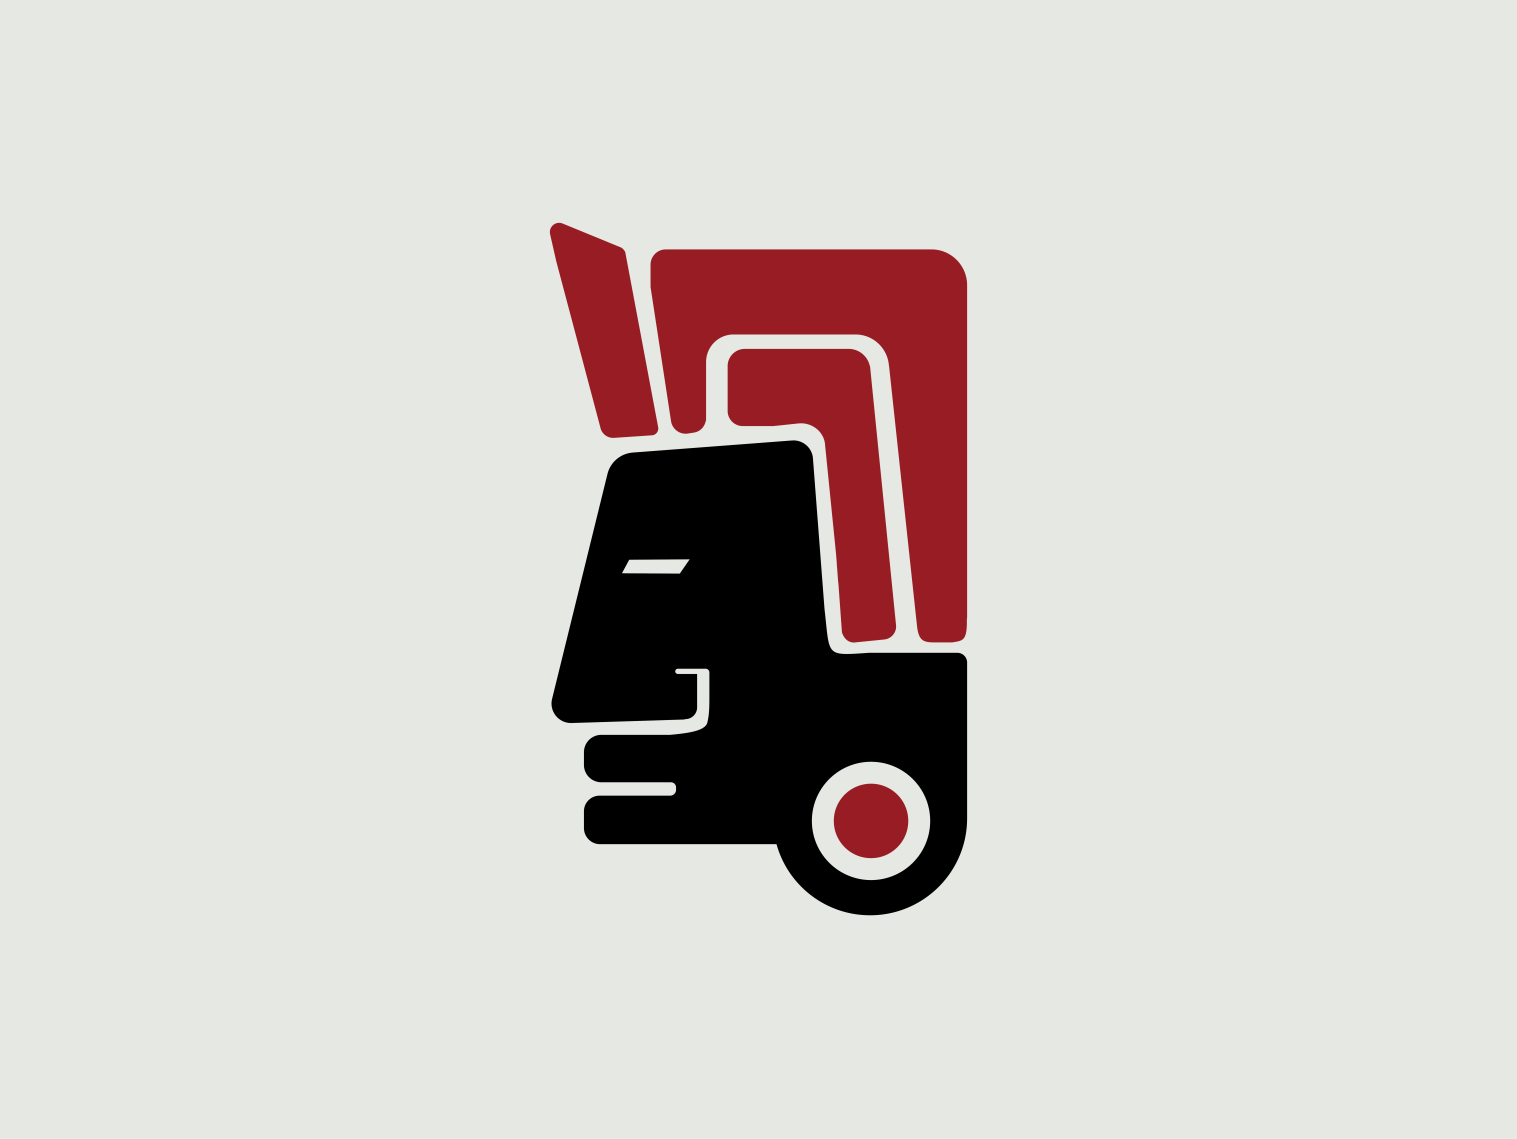 Solimo Logo (Red & Black) by Iqra on Dribbble